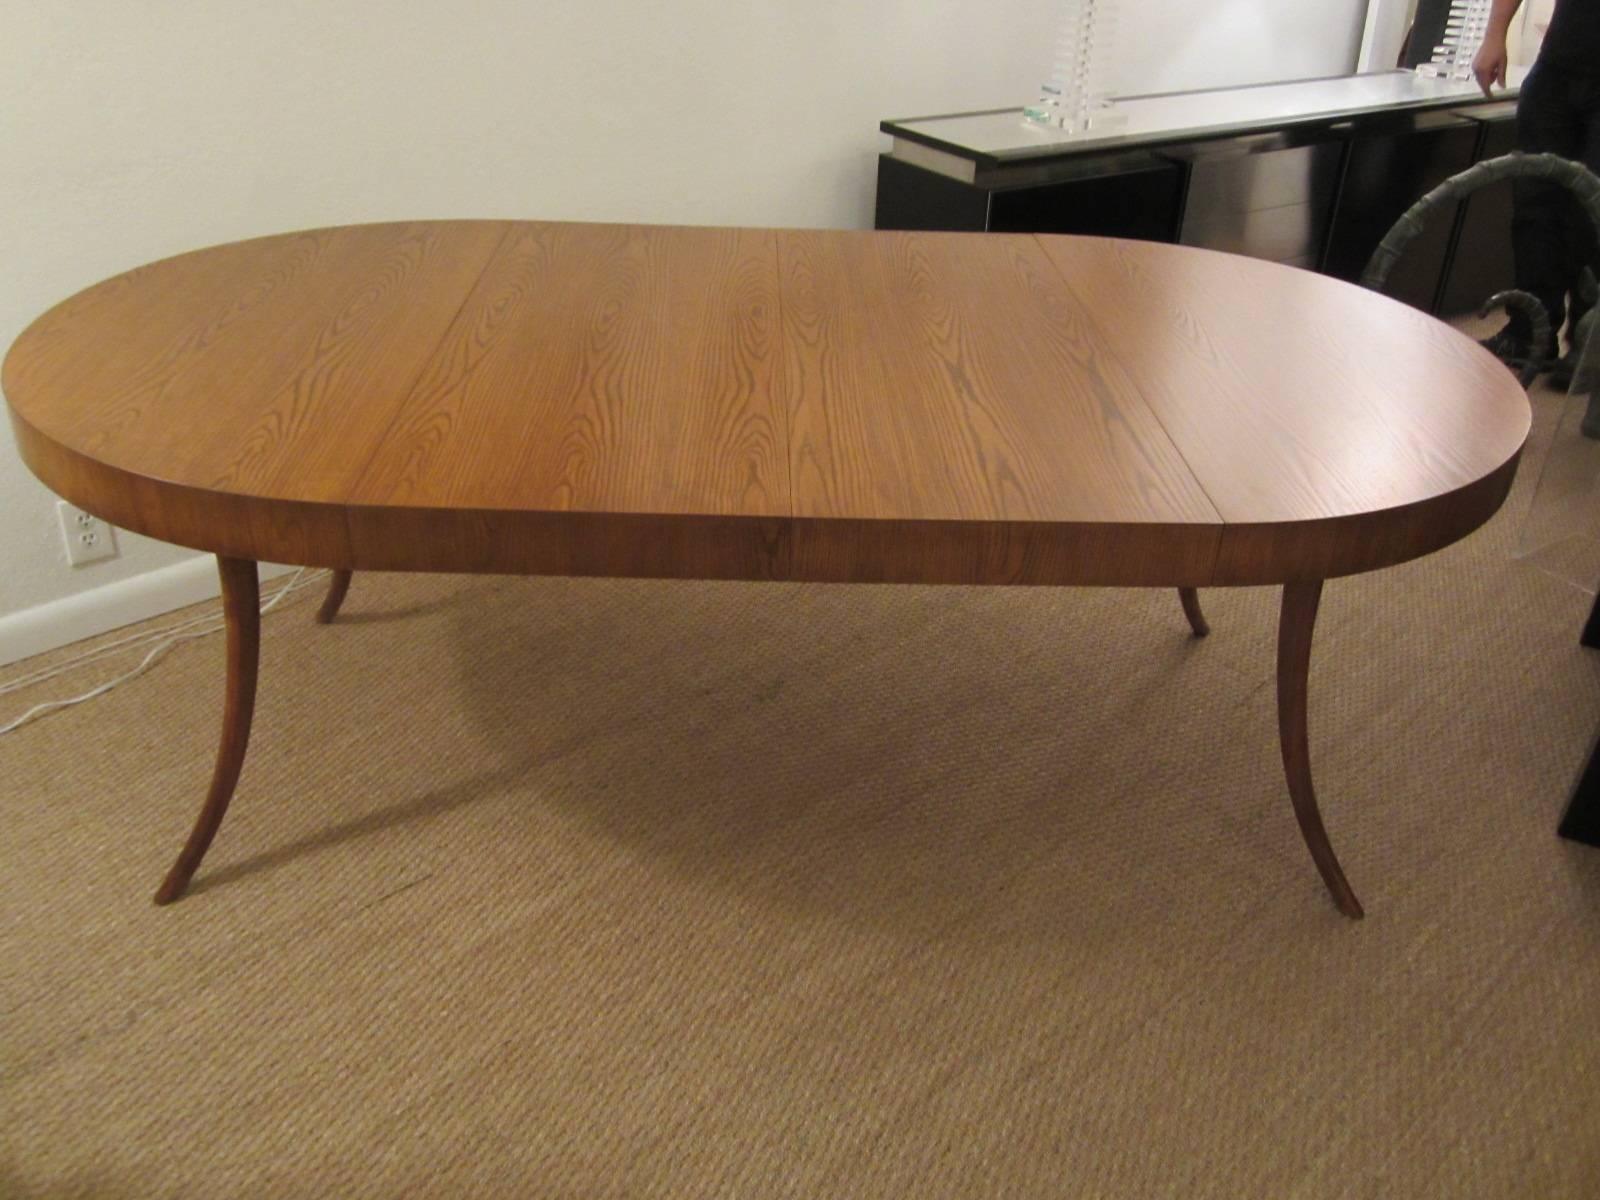 Gorgeous oblong walnut and mahogany dining table with Klismos legs and two leaves as shown in main image. When the leaves are removed, the table is a perfect round, shown in the additional images. Designed for the John Widdicomb Furniture Company in